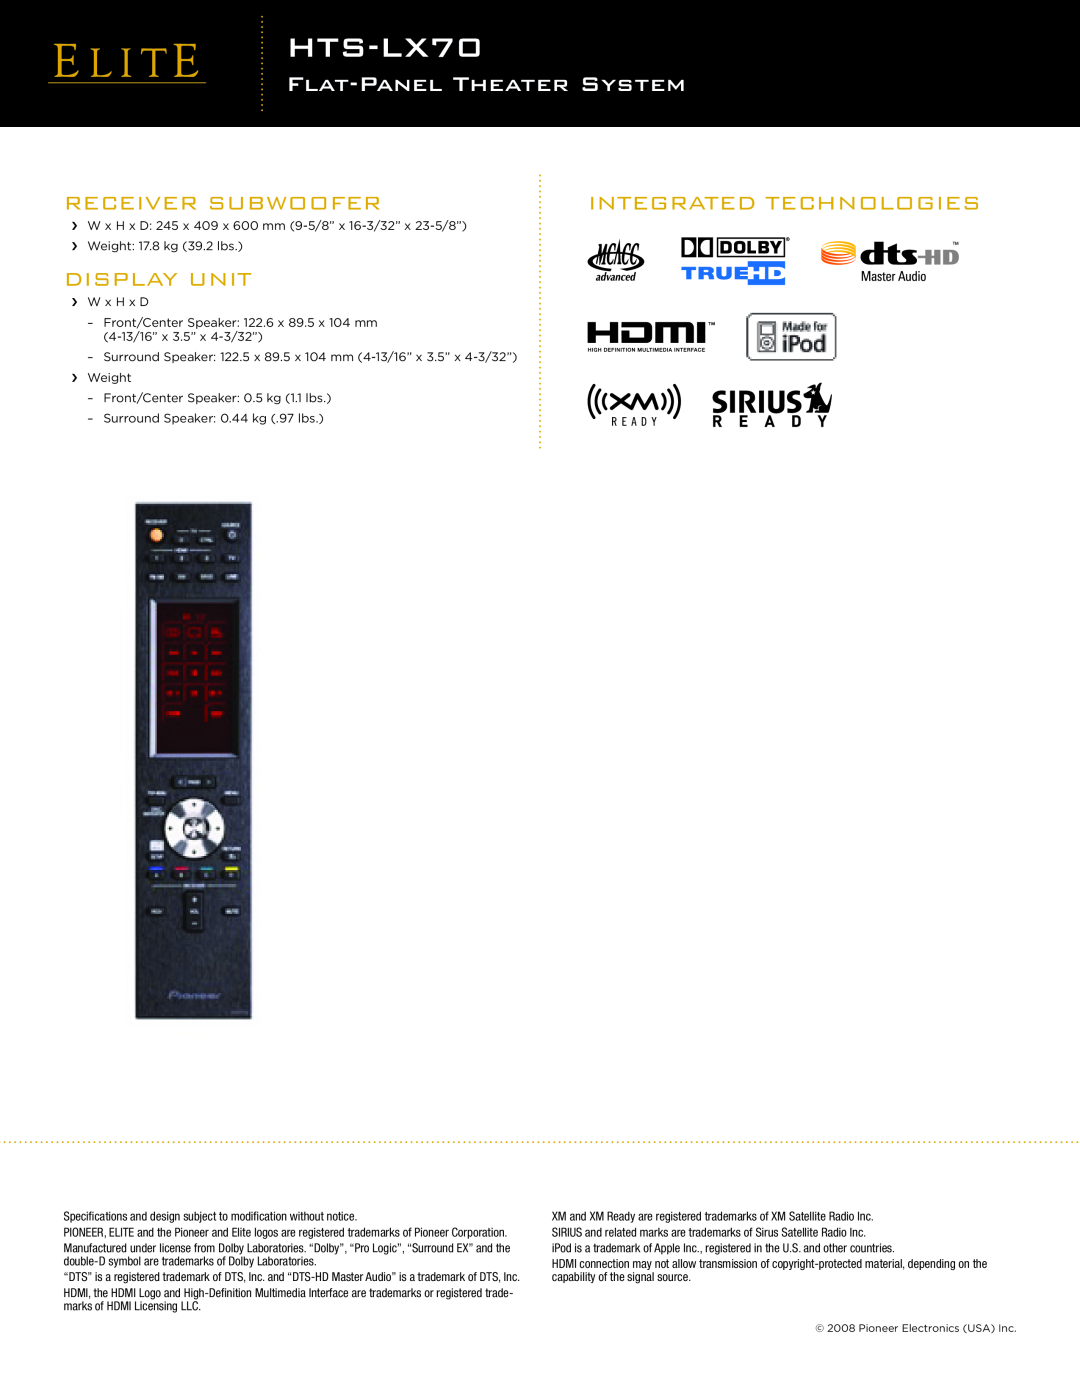 Elite HTS-LX70 specifications Integrated Technologies, Receiver Subwoofer, Display Unit, Flat-Panel Theater System 